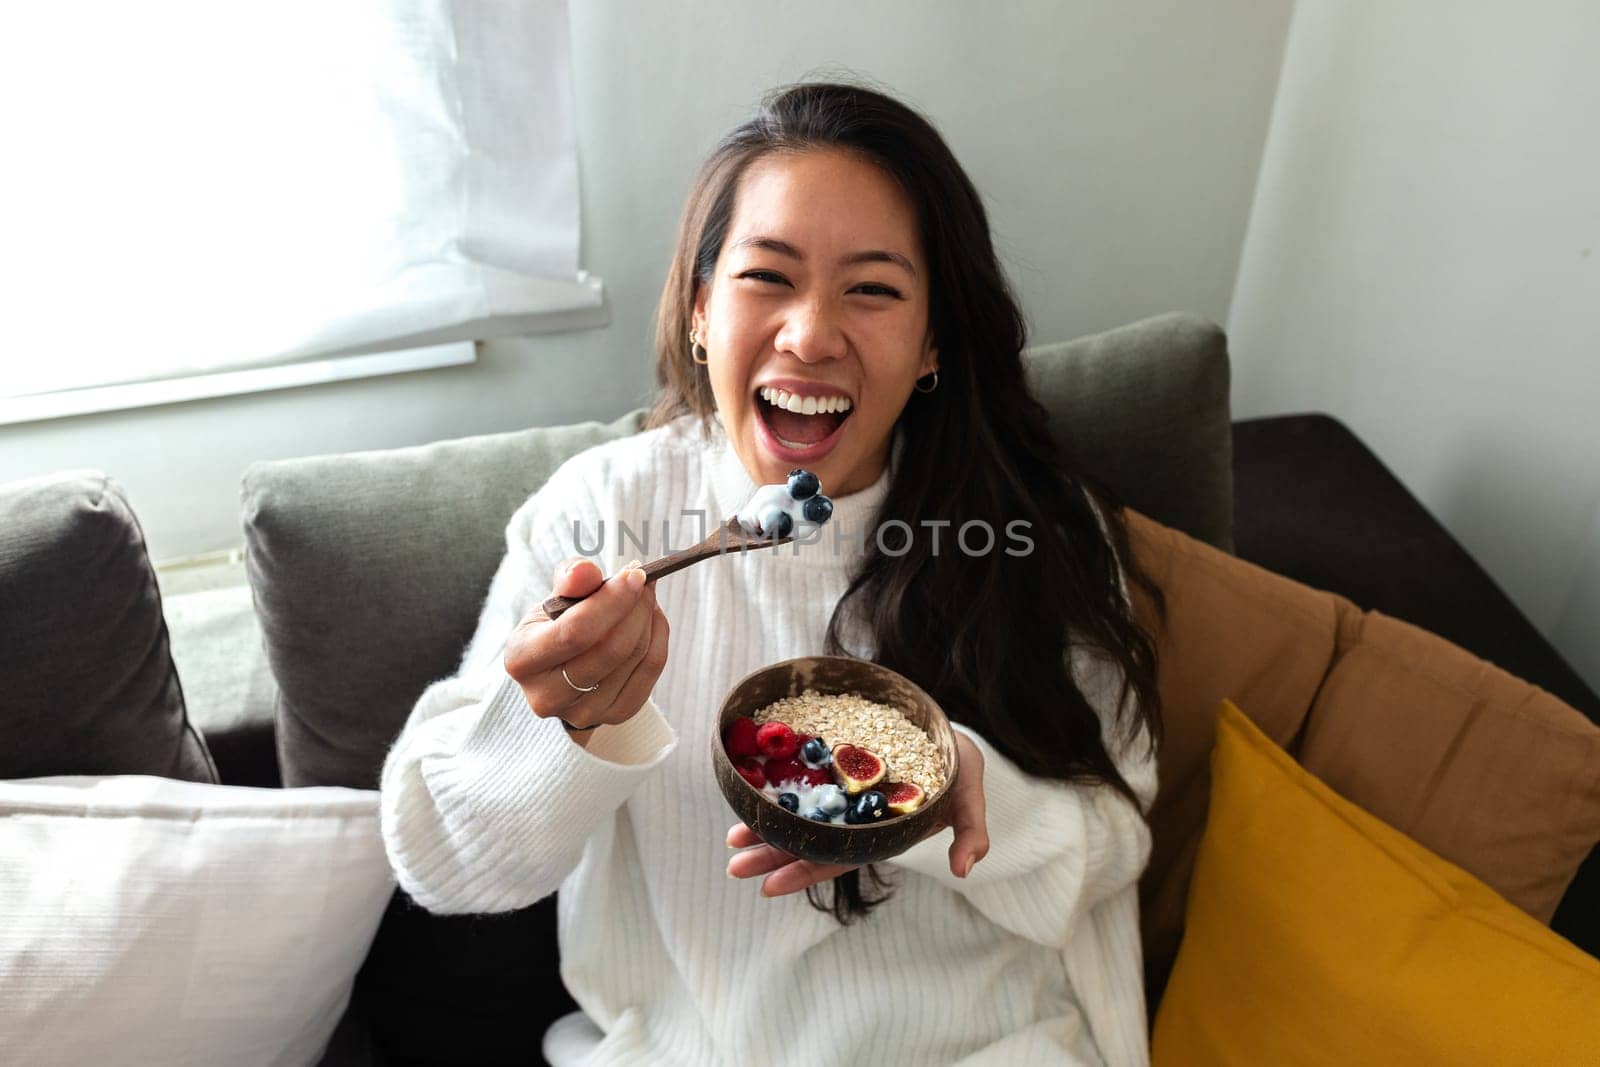 Smiling young happy Asian woman eating healthy breakfast bowl of yogurt looking at camera. Healthy lifestyle concept.